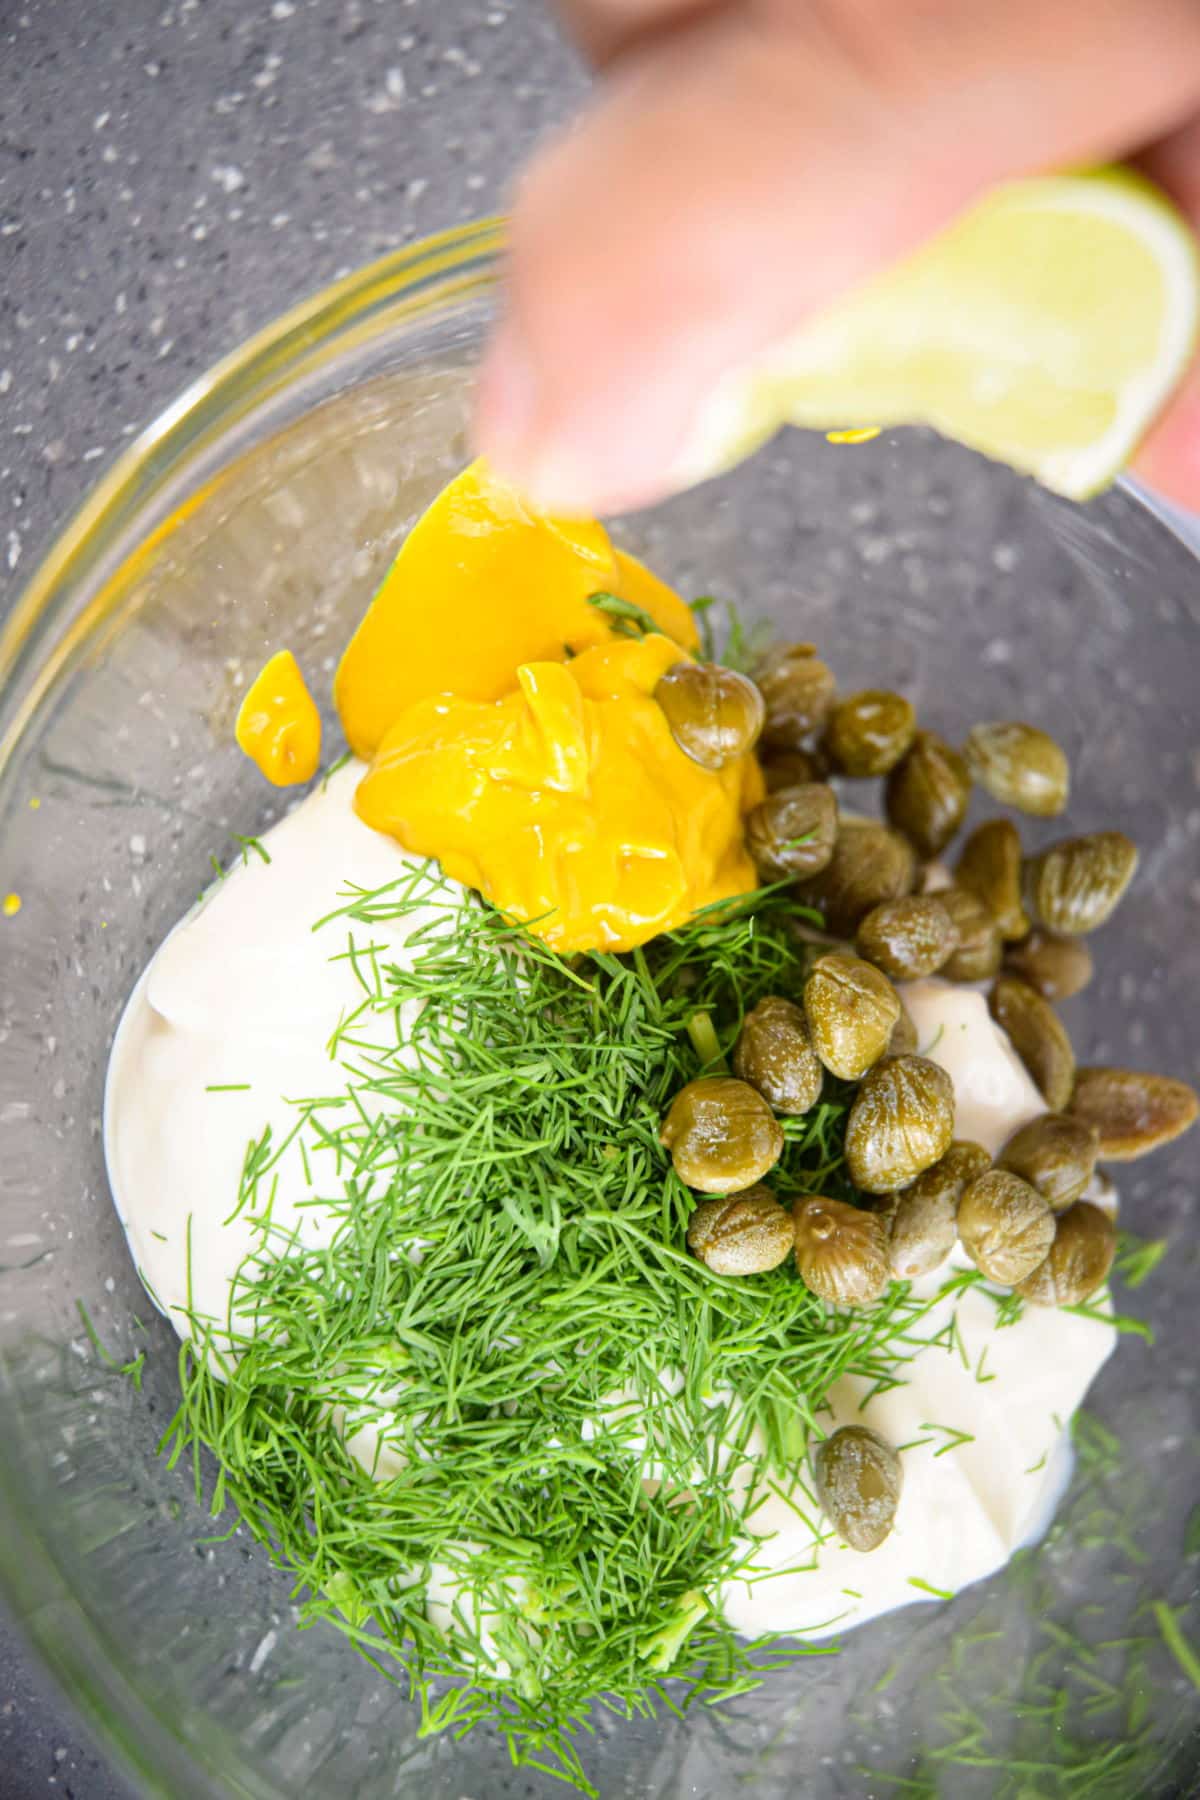 Dill dip ingredients in a bowl.